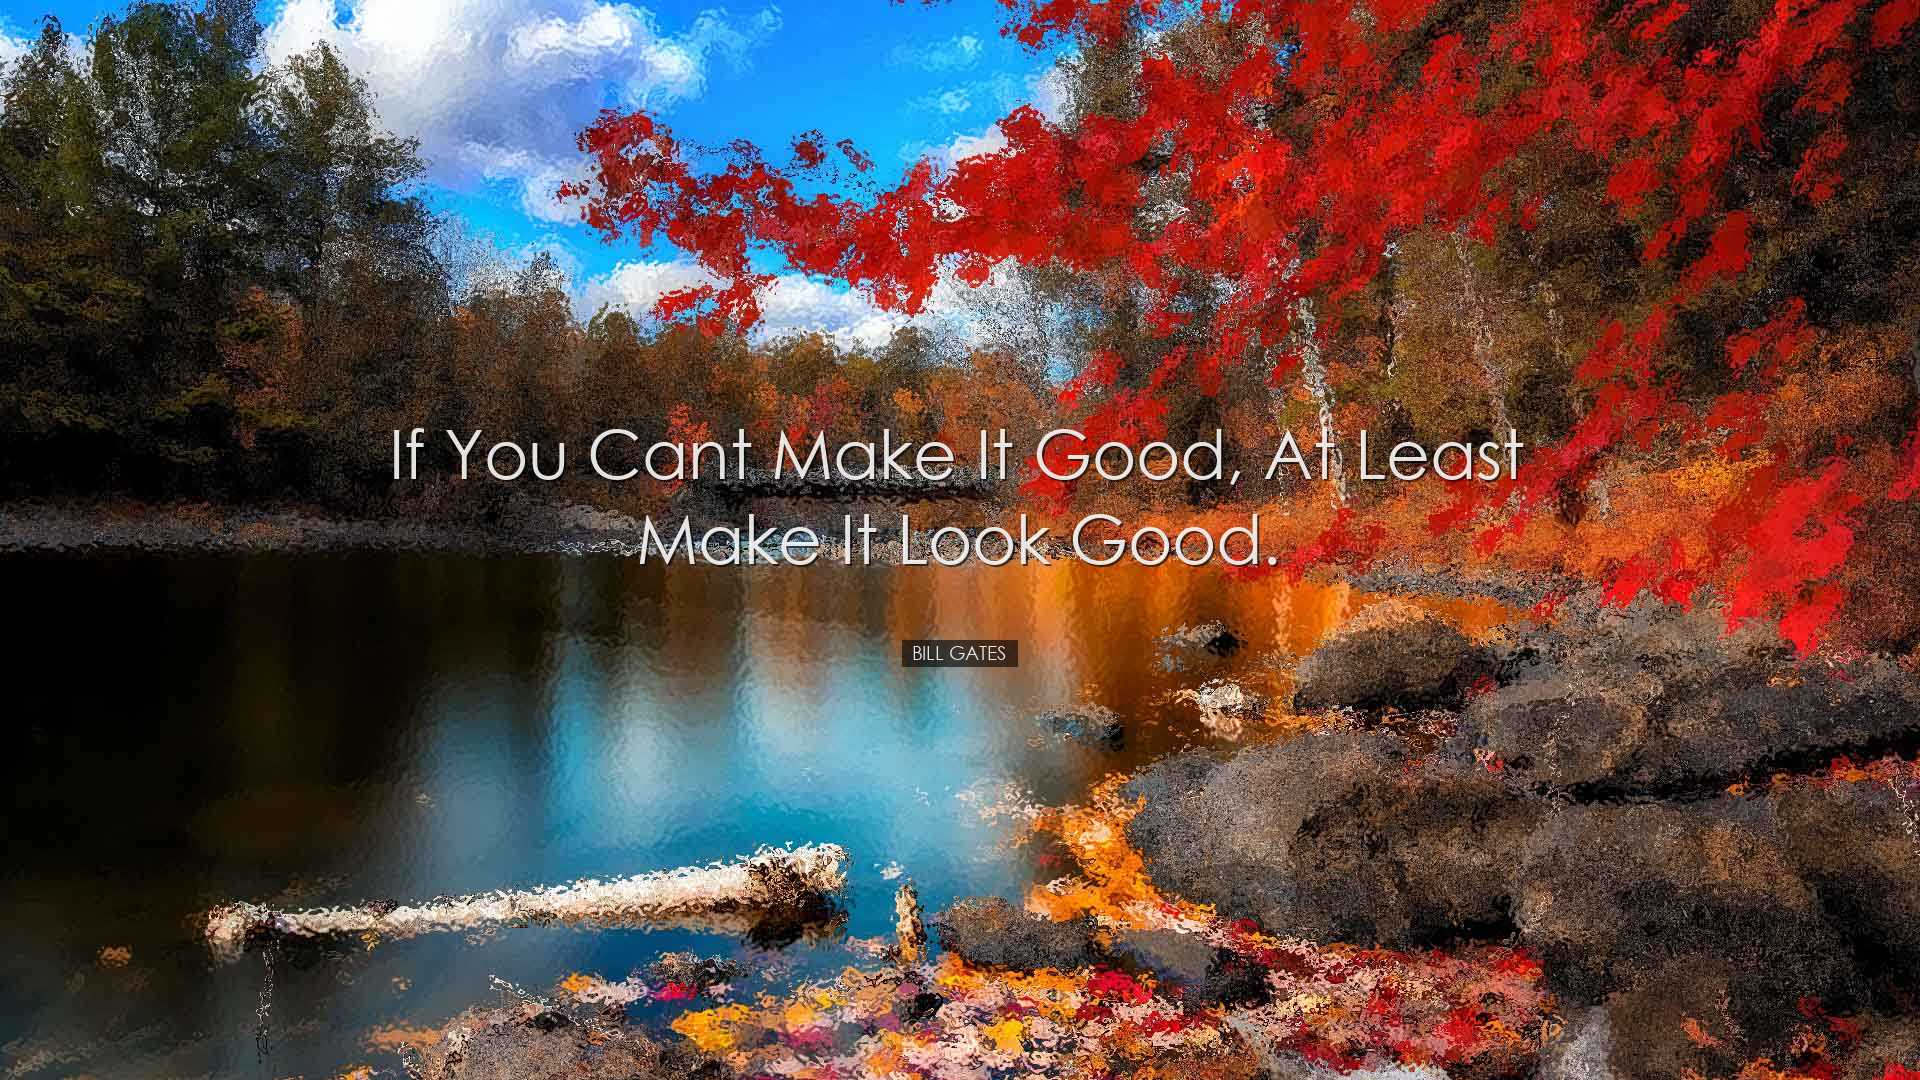 If you cant make it good, at least make it look good. - Bill Gates